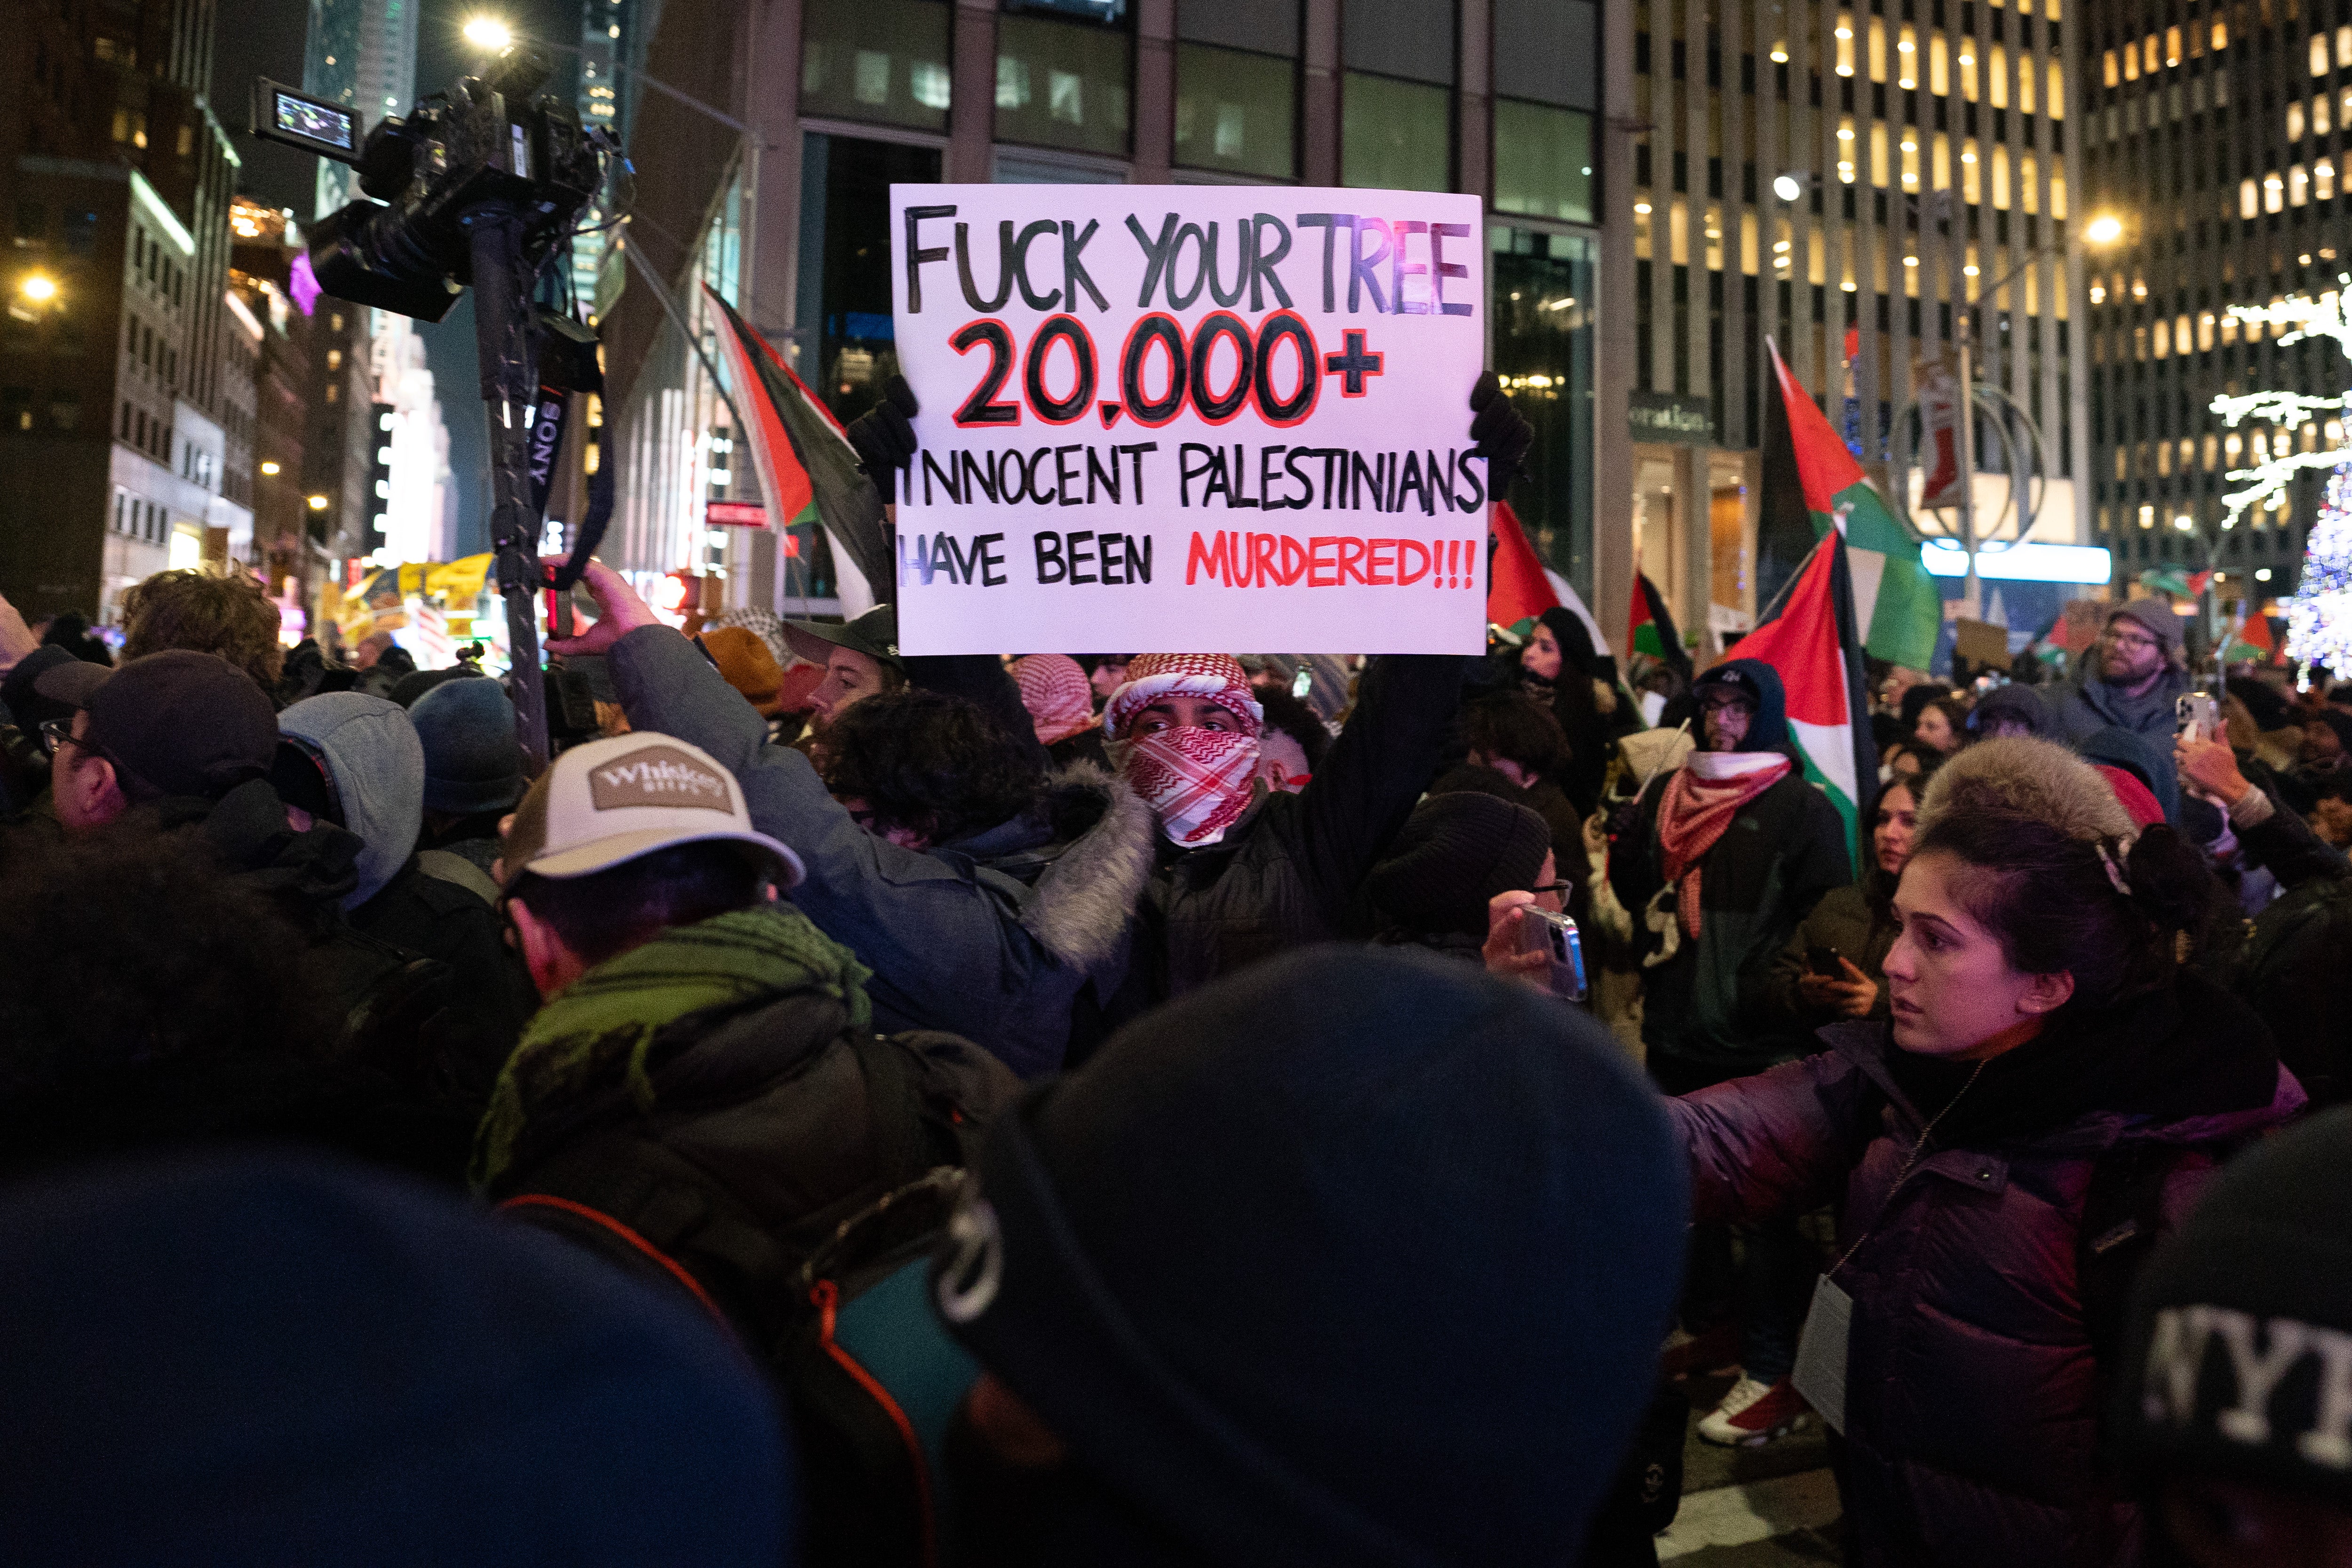 A protestor holding a sign at the ongoing holiday celebration in NYC